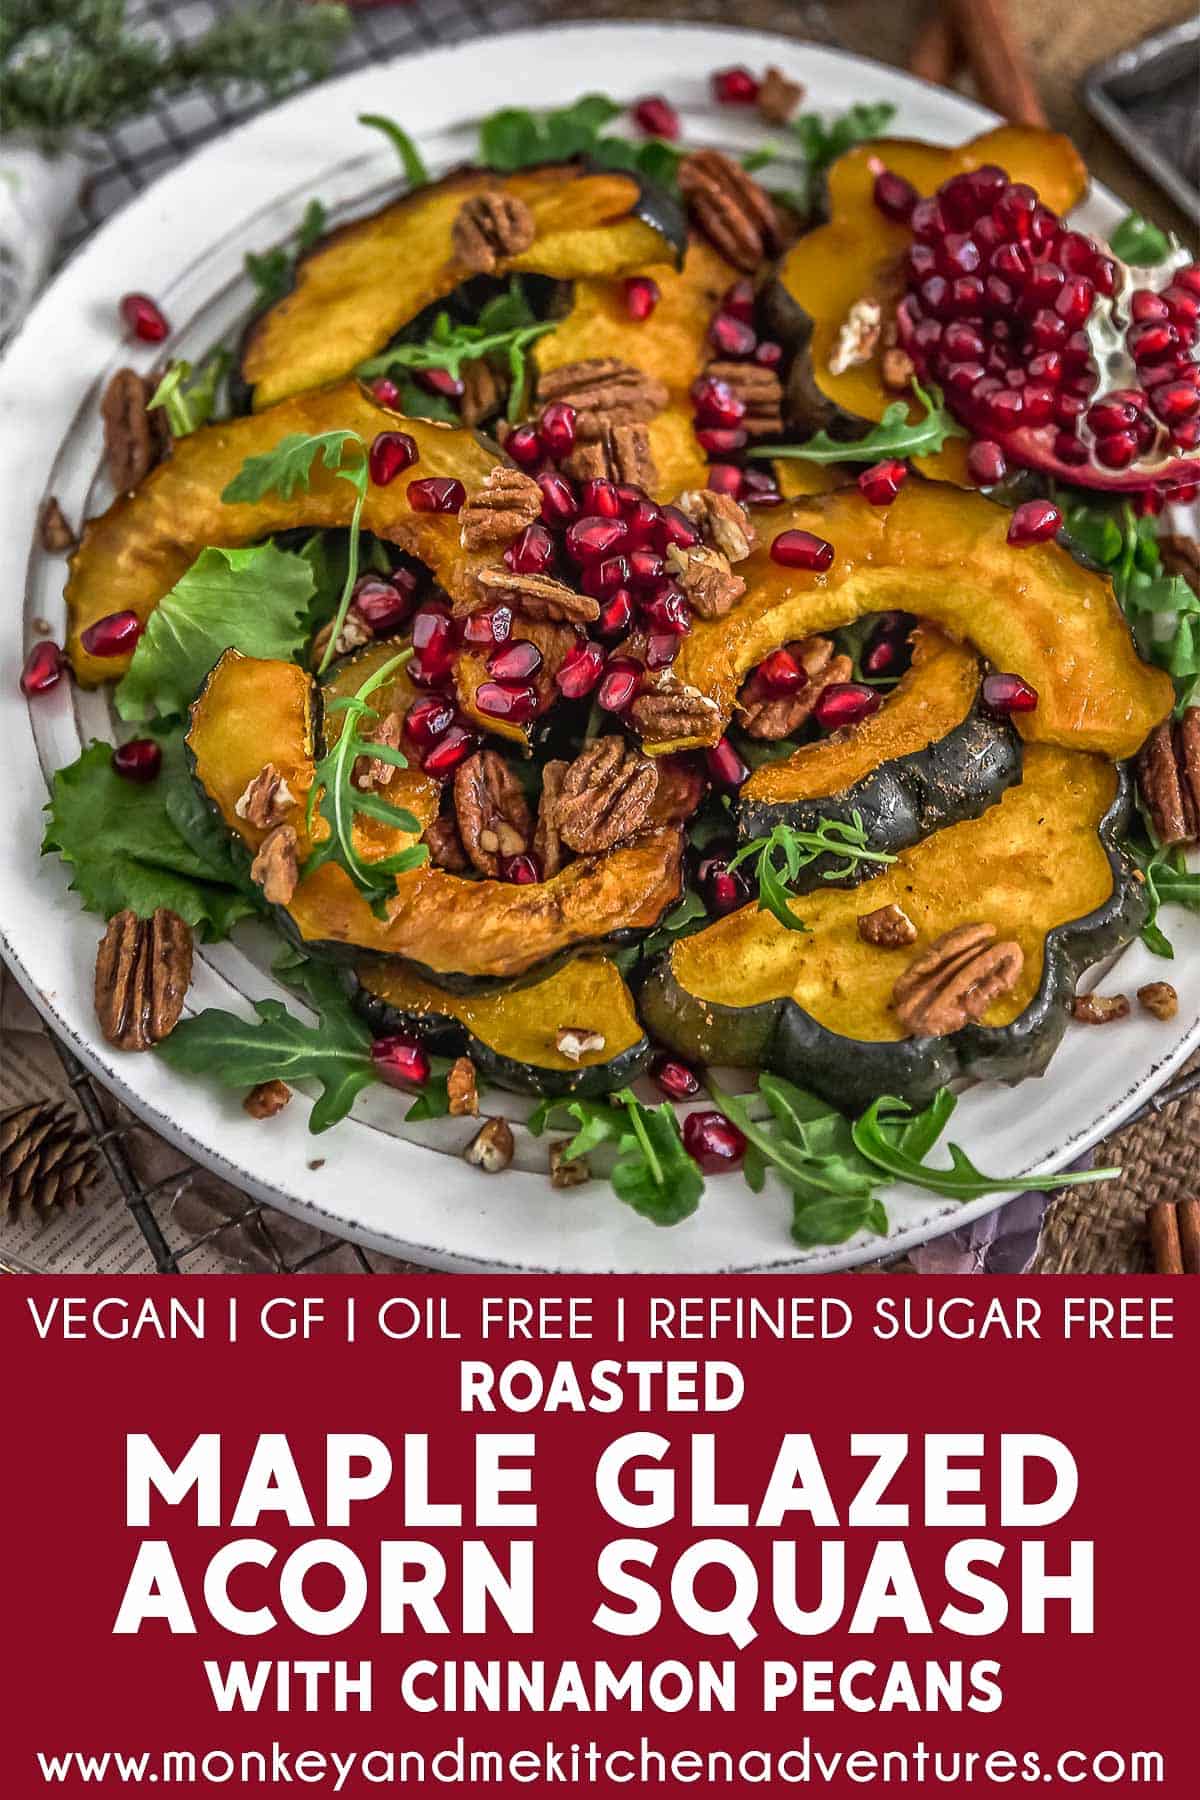 Roasted Maple Glazed Acorn Squash with Cinnamon Pecans with text description